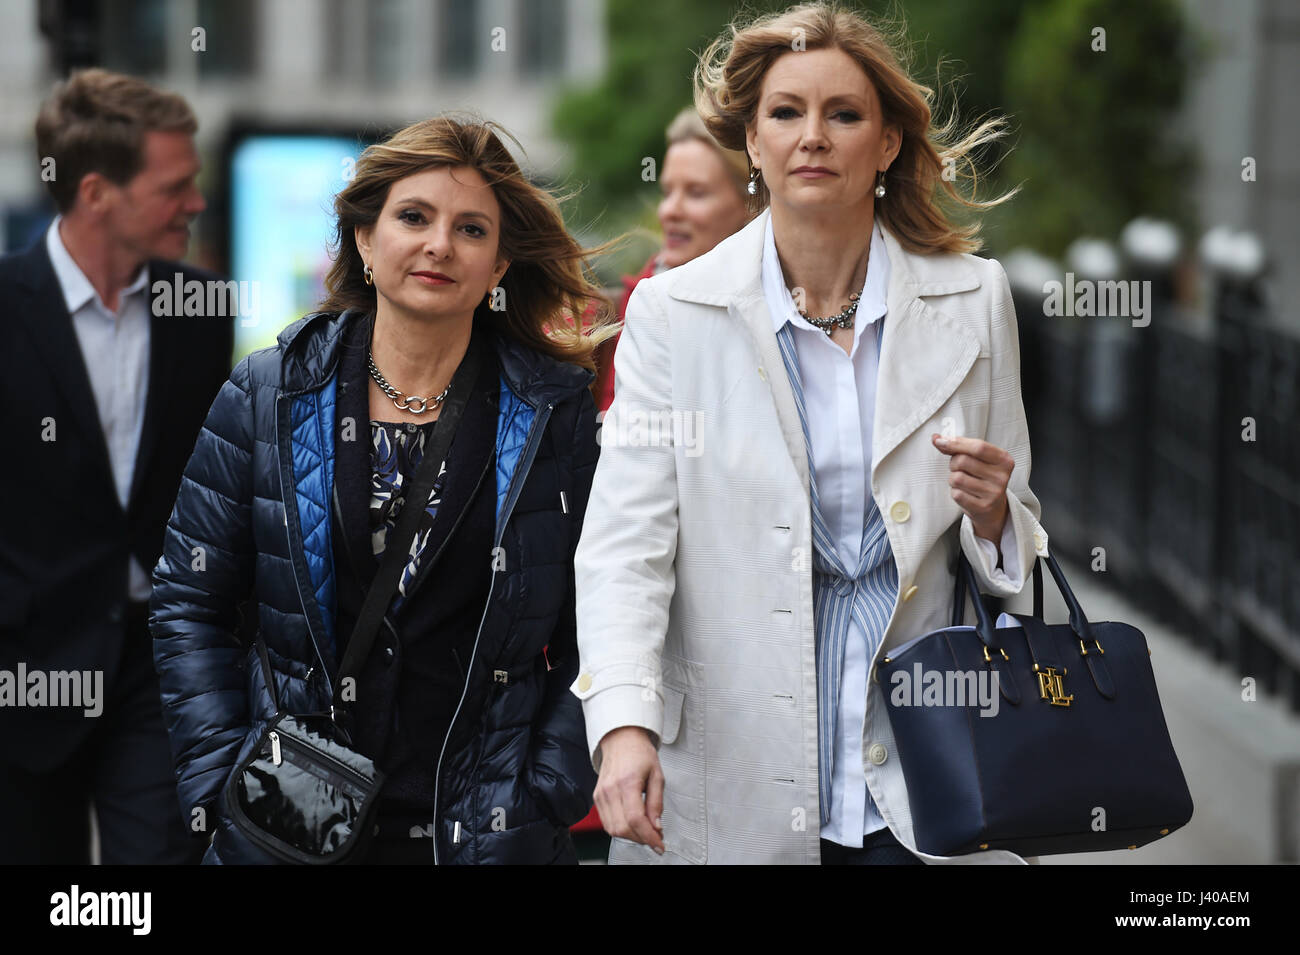 Lisa Bloom (left) with Dr. Wendy Walsh arriving at Ofcom in London, to issue a warning over Rupert Murdoch's bid for Sky. Stock Photo